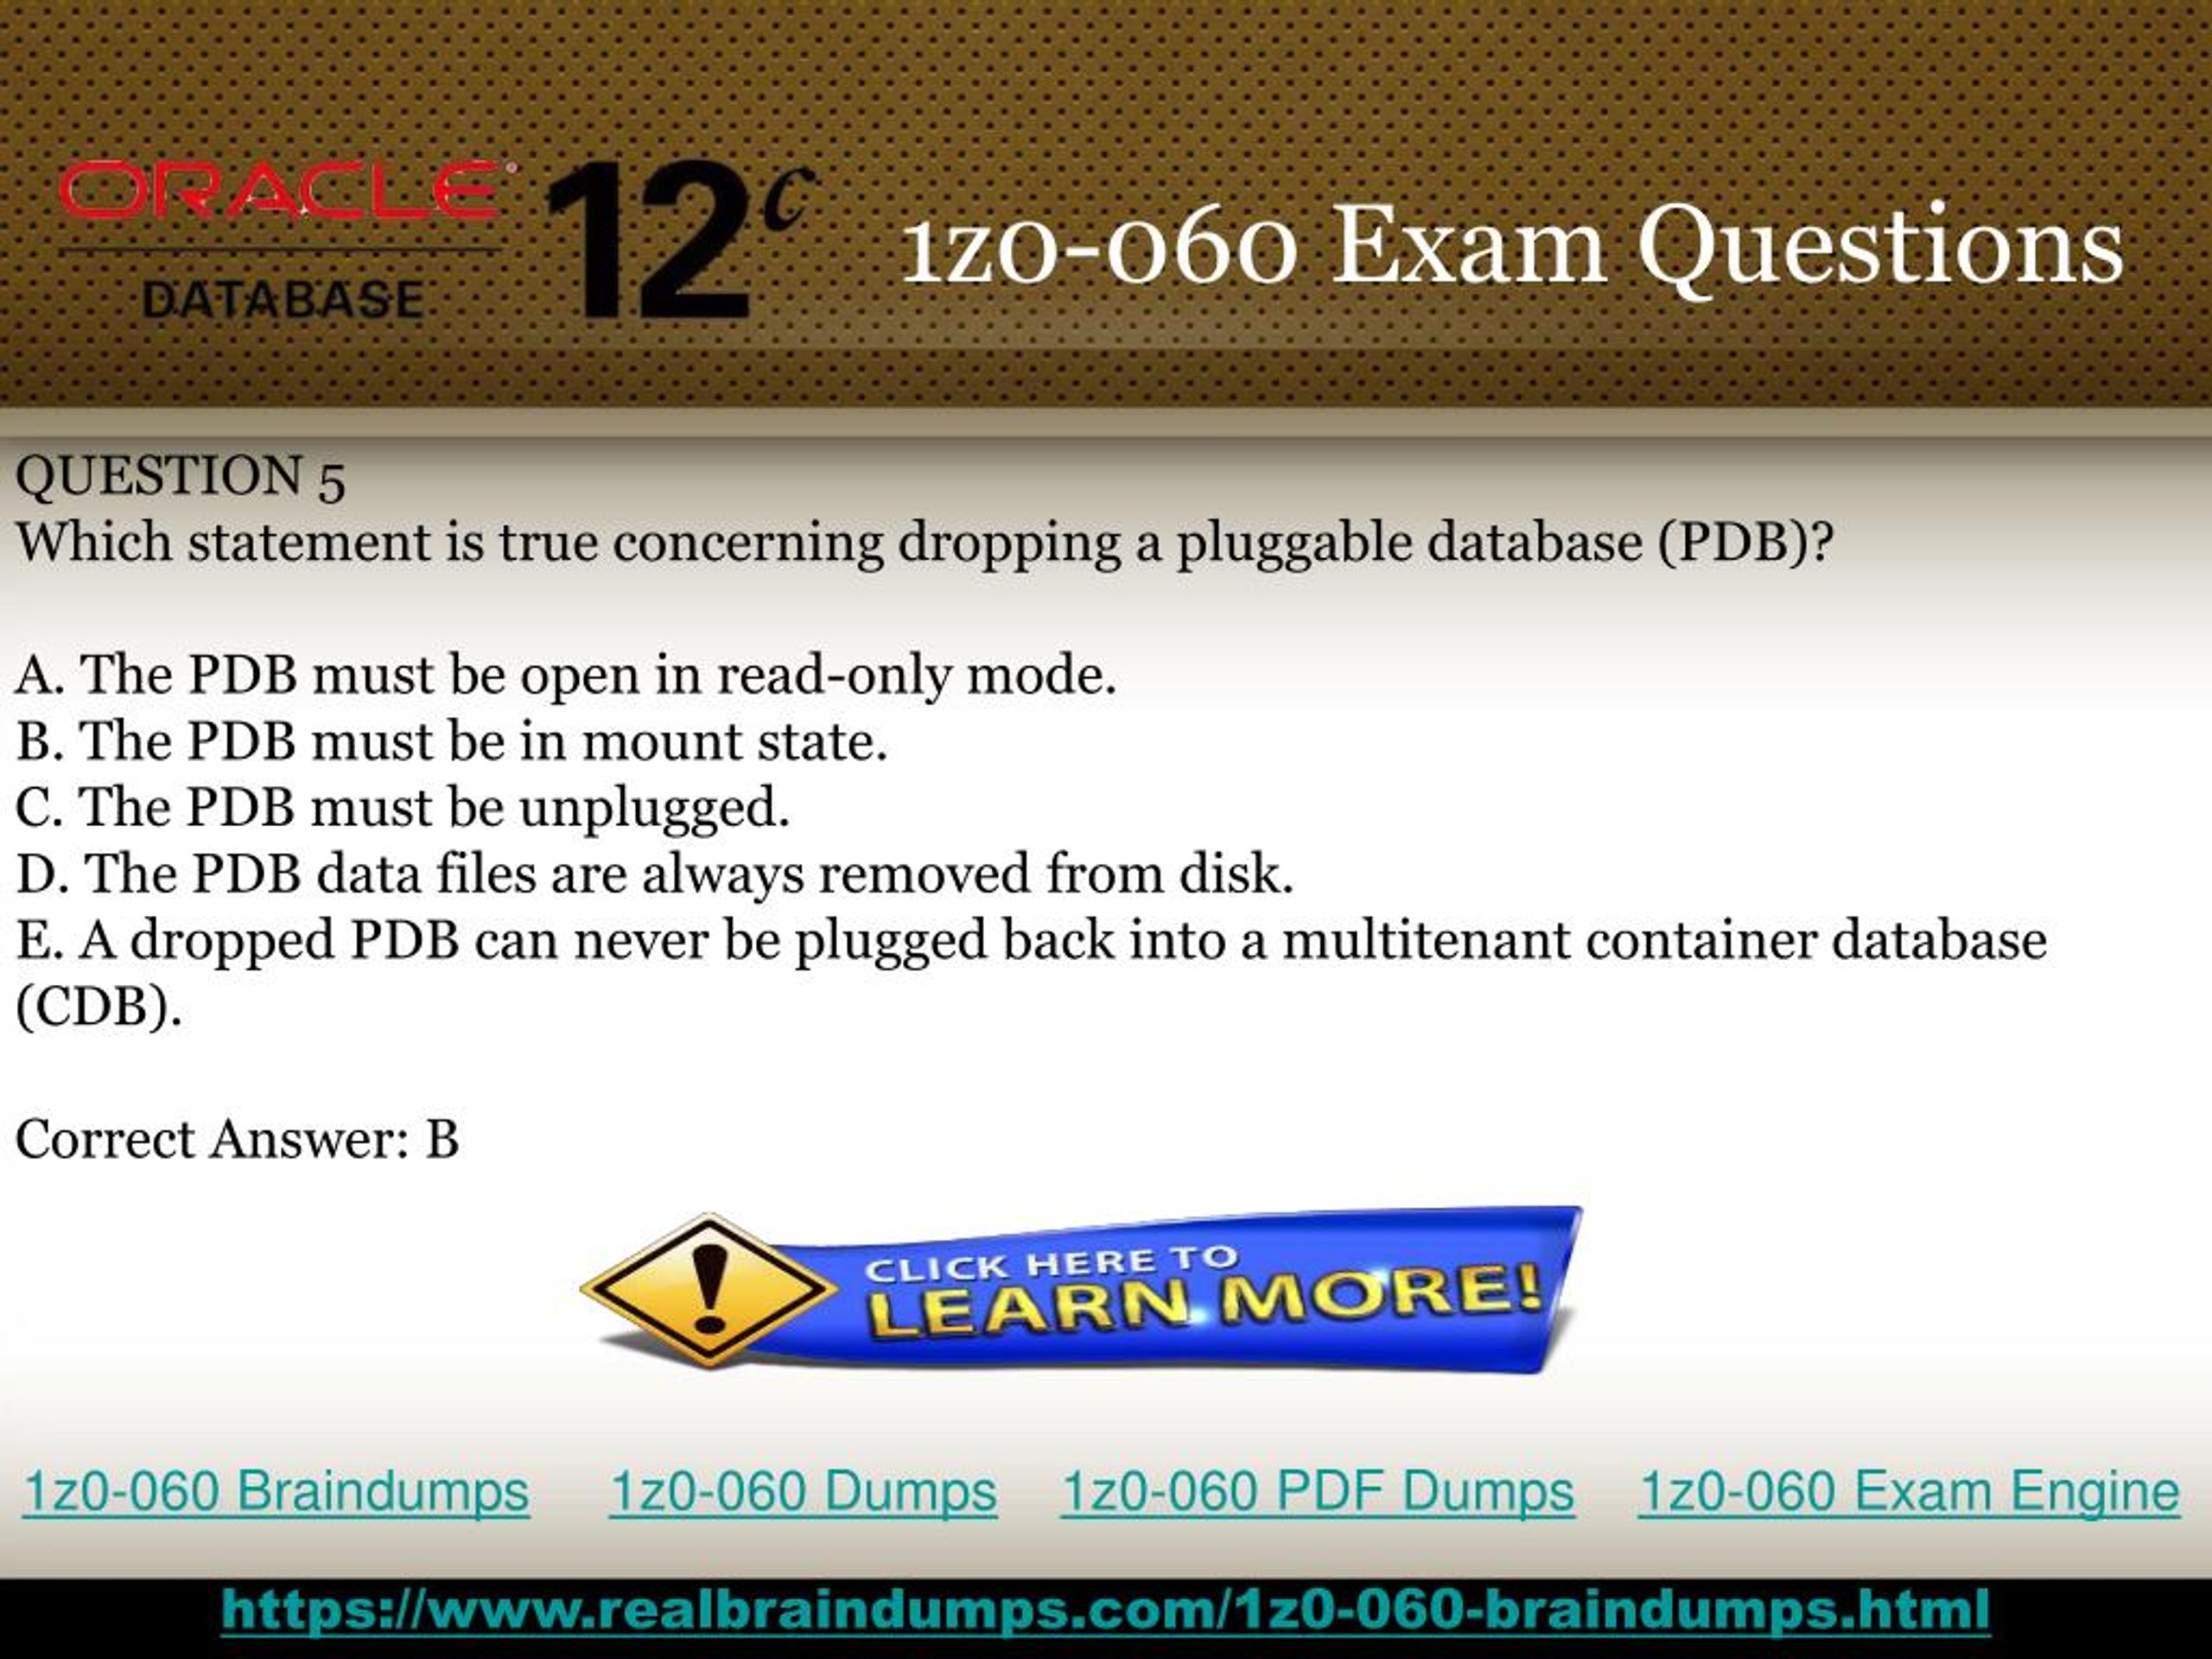 Examcollection JN0-222 Questions Answers